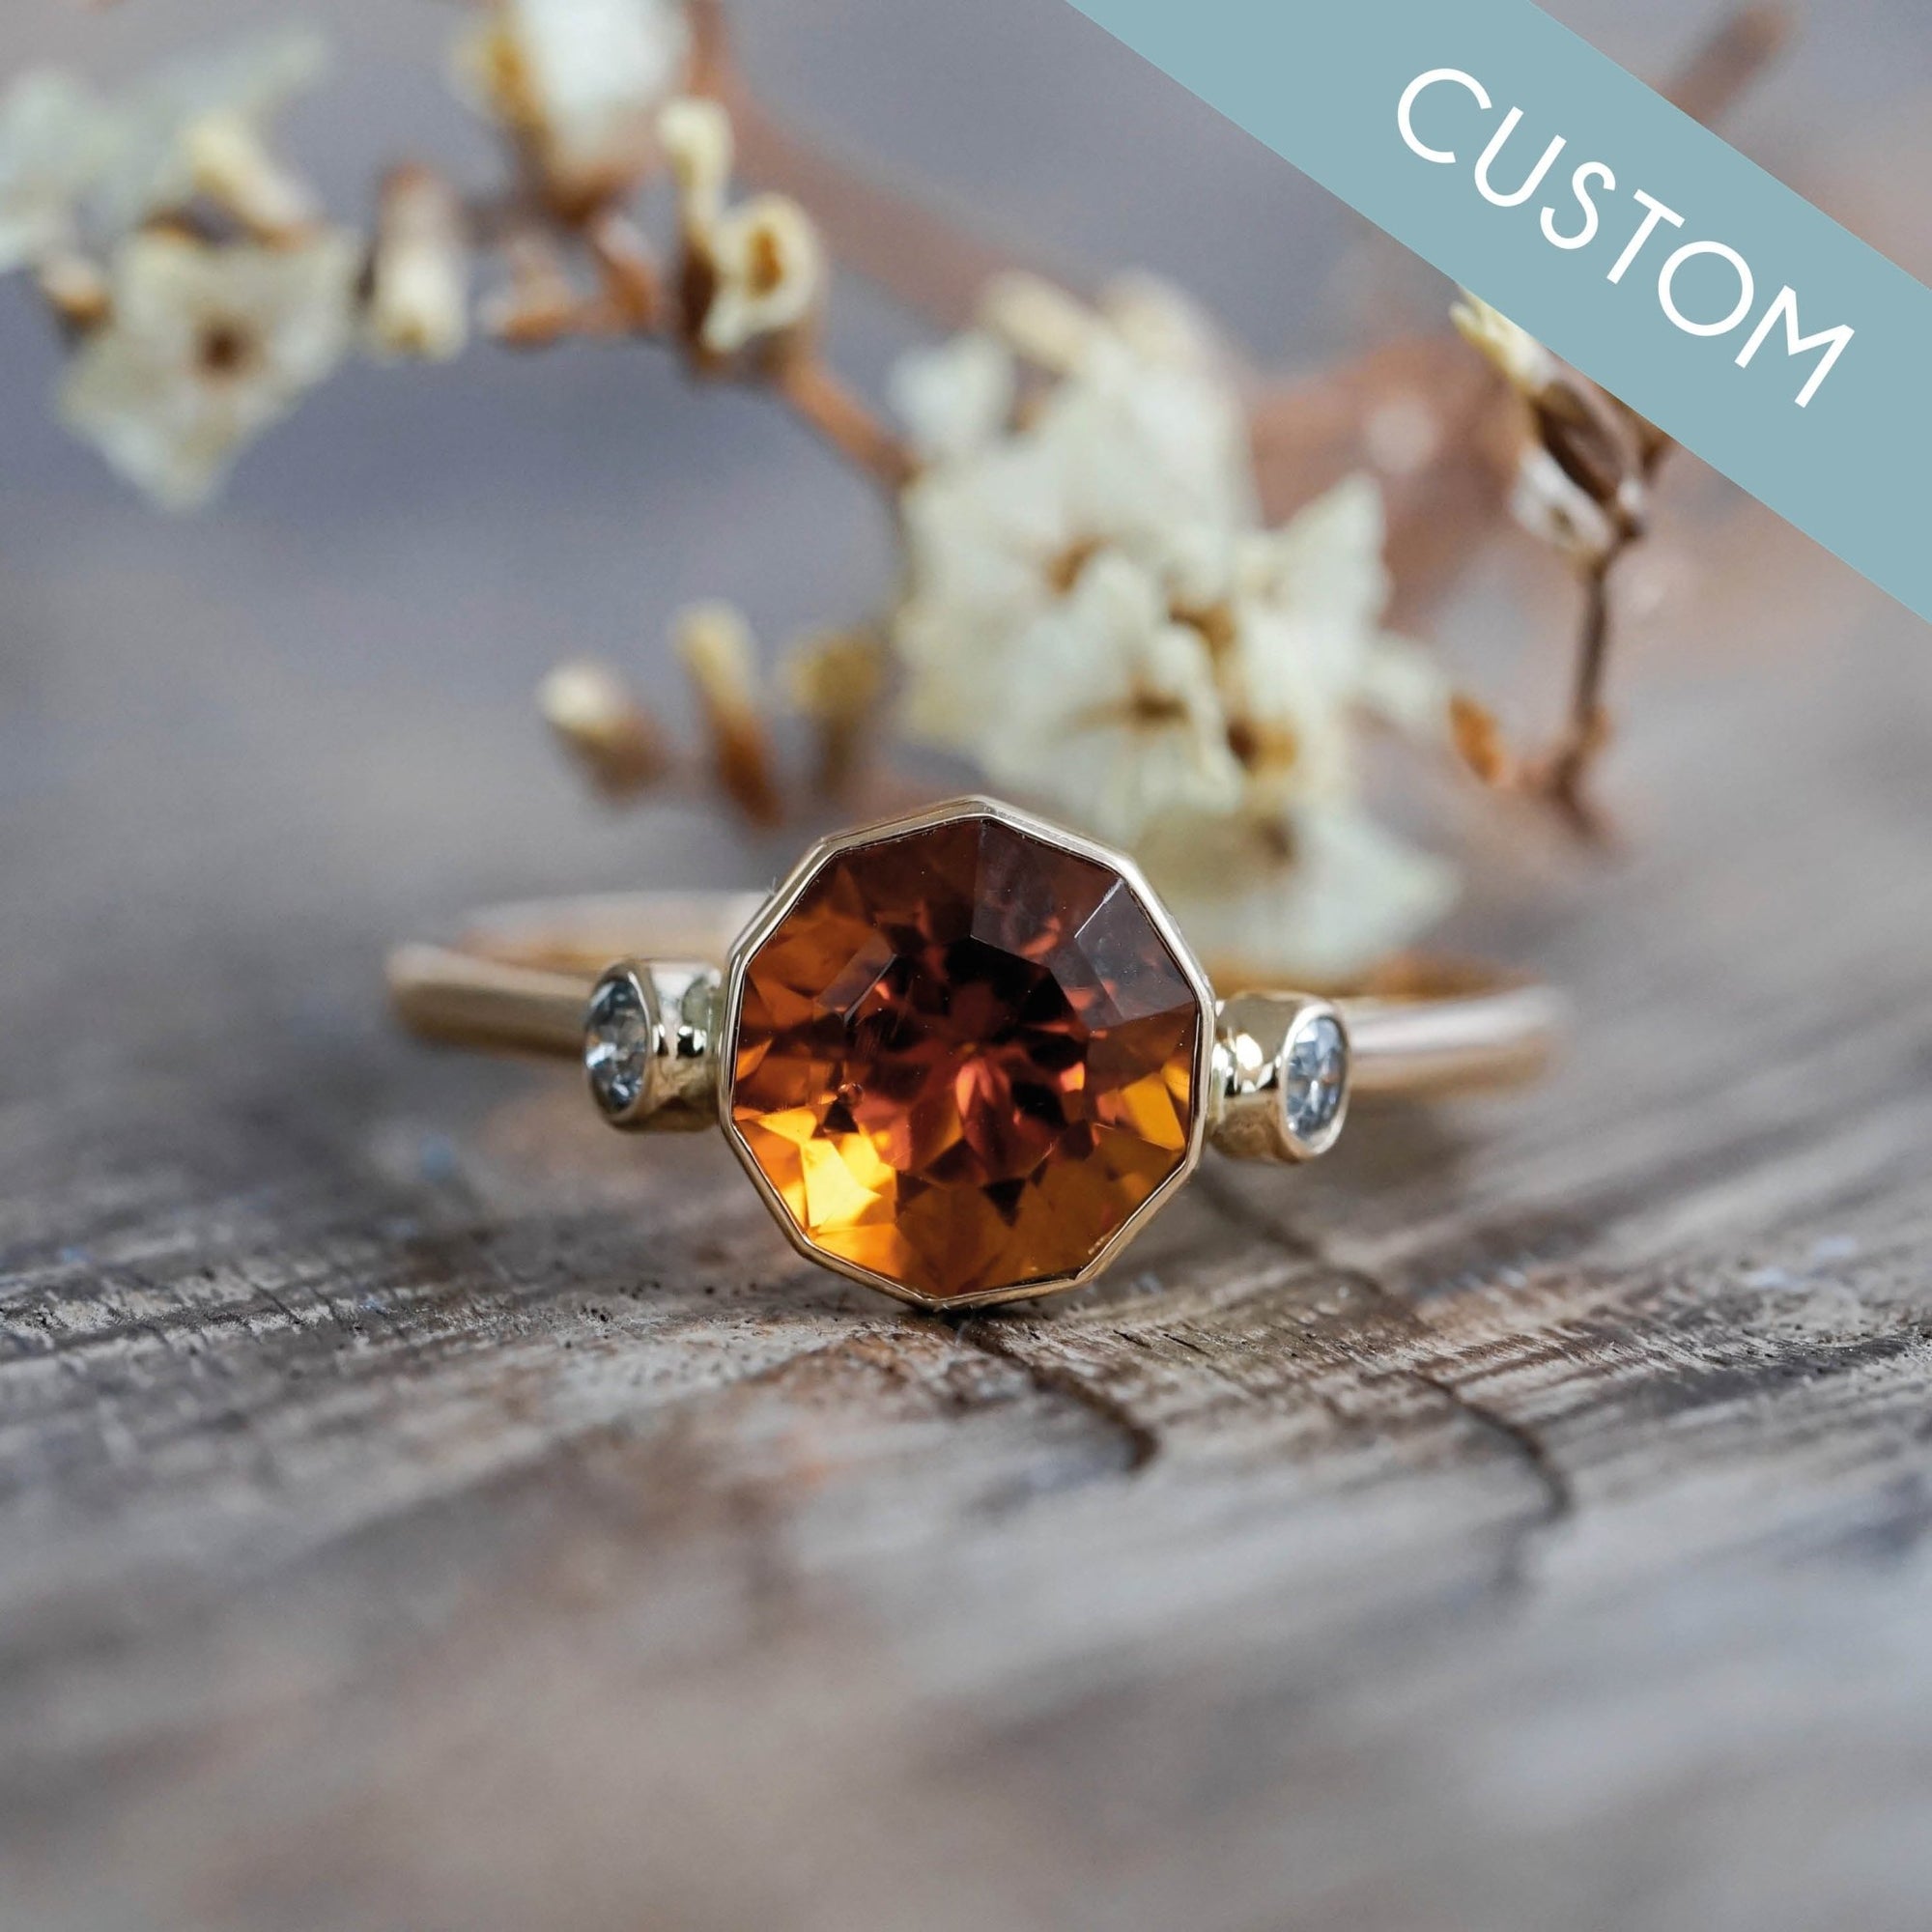 Custom Citrine Ring in Ethical Gold - Gardens of the Sun | Ethical Jewelry